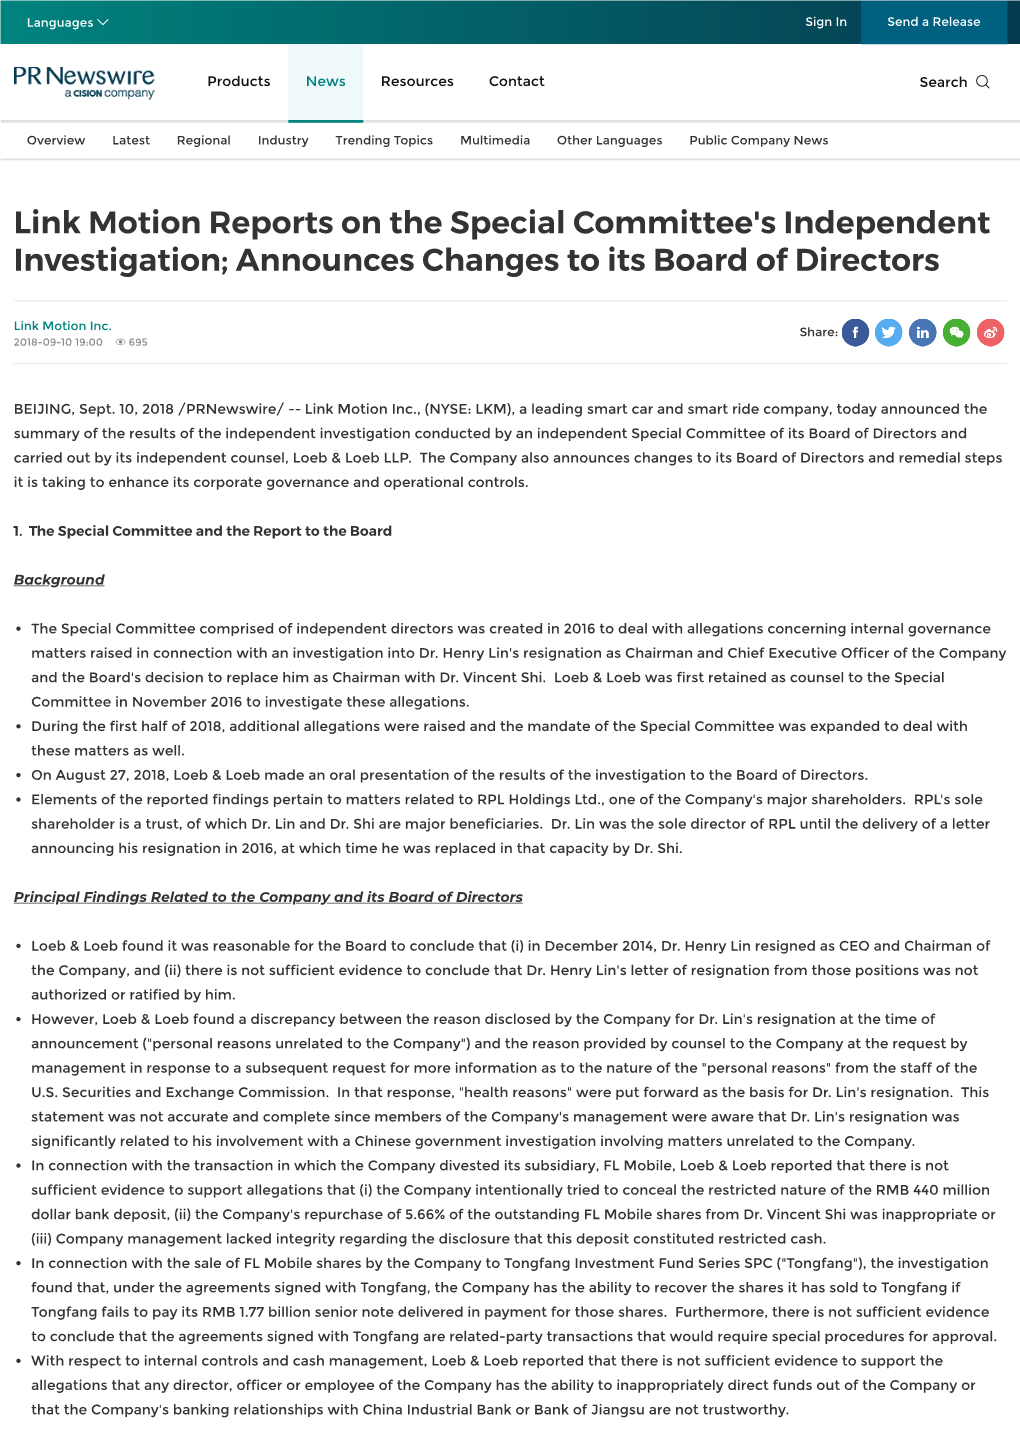 Link Motion Reports on the Special Committee's Independent Investigation; Announces Changes to Its Board of Directors